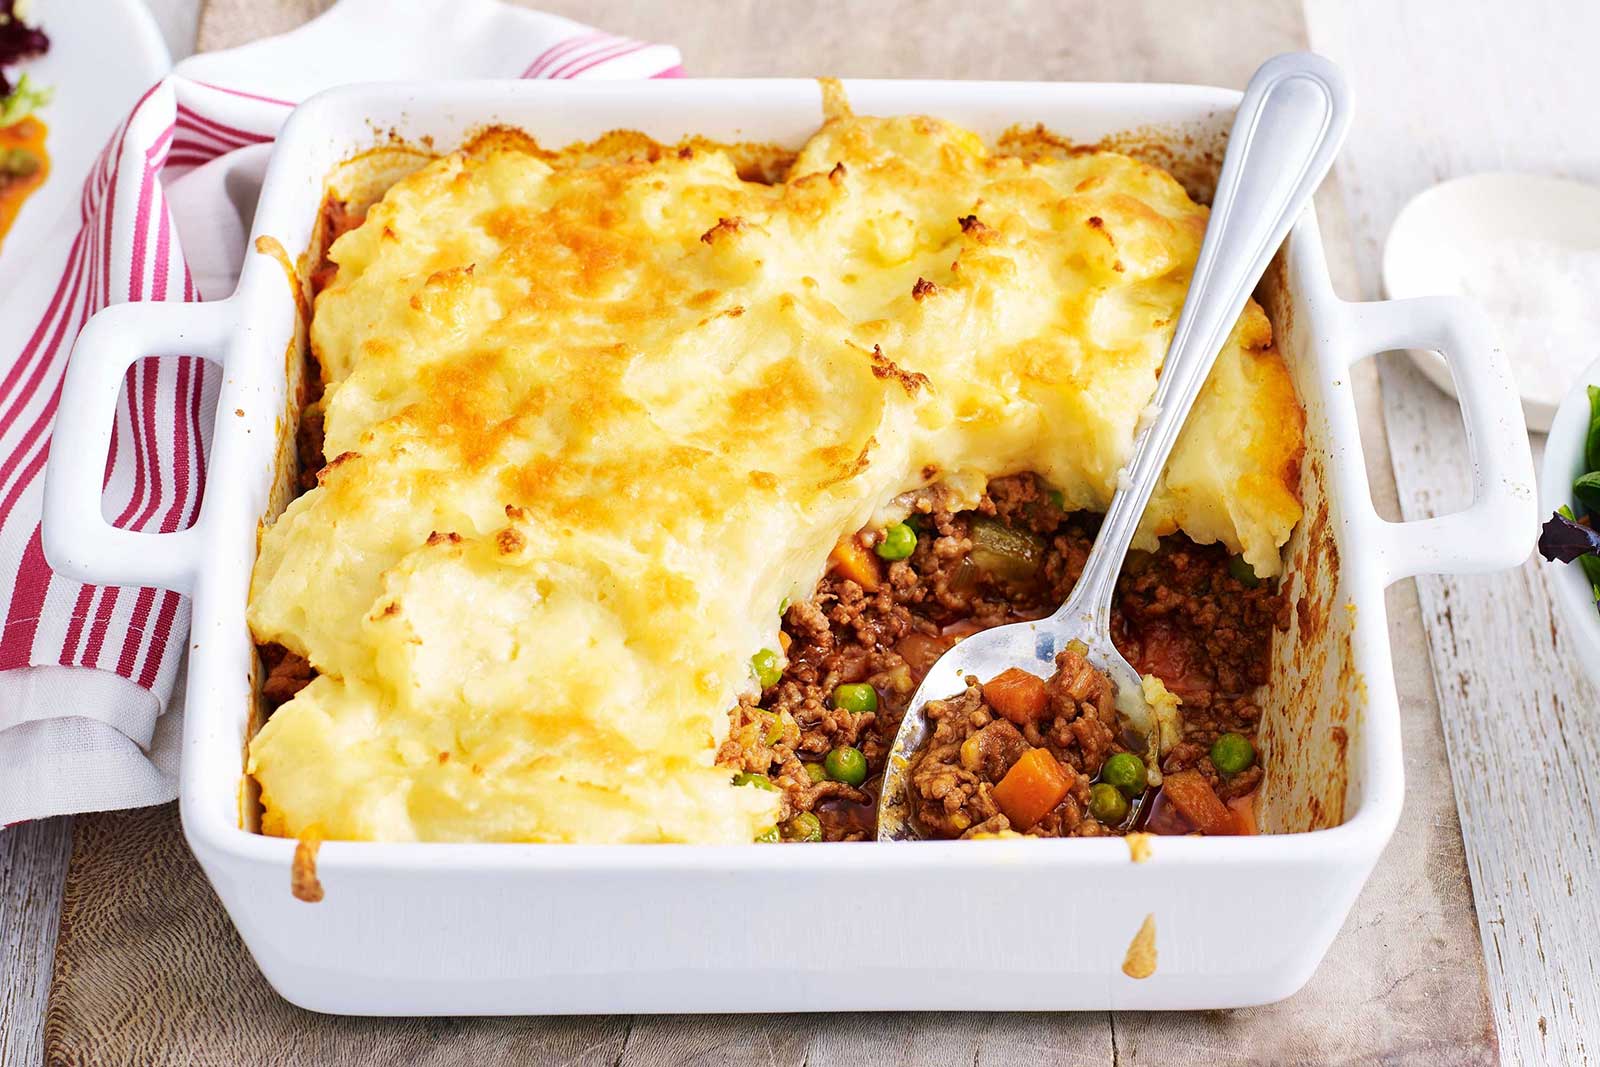 🌮 Eat an International Food for Every Letter of the Alphabet If You Want Us to Guess Your Generation Shepherds Pie